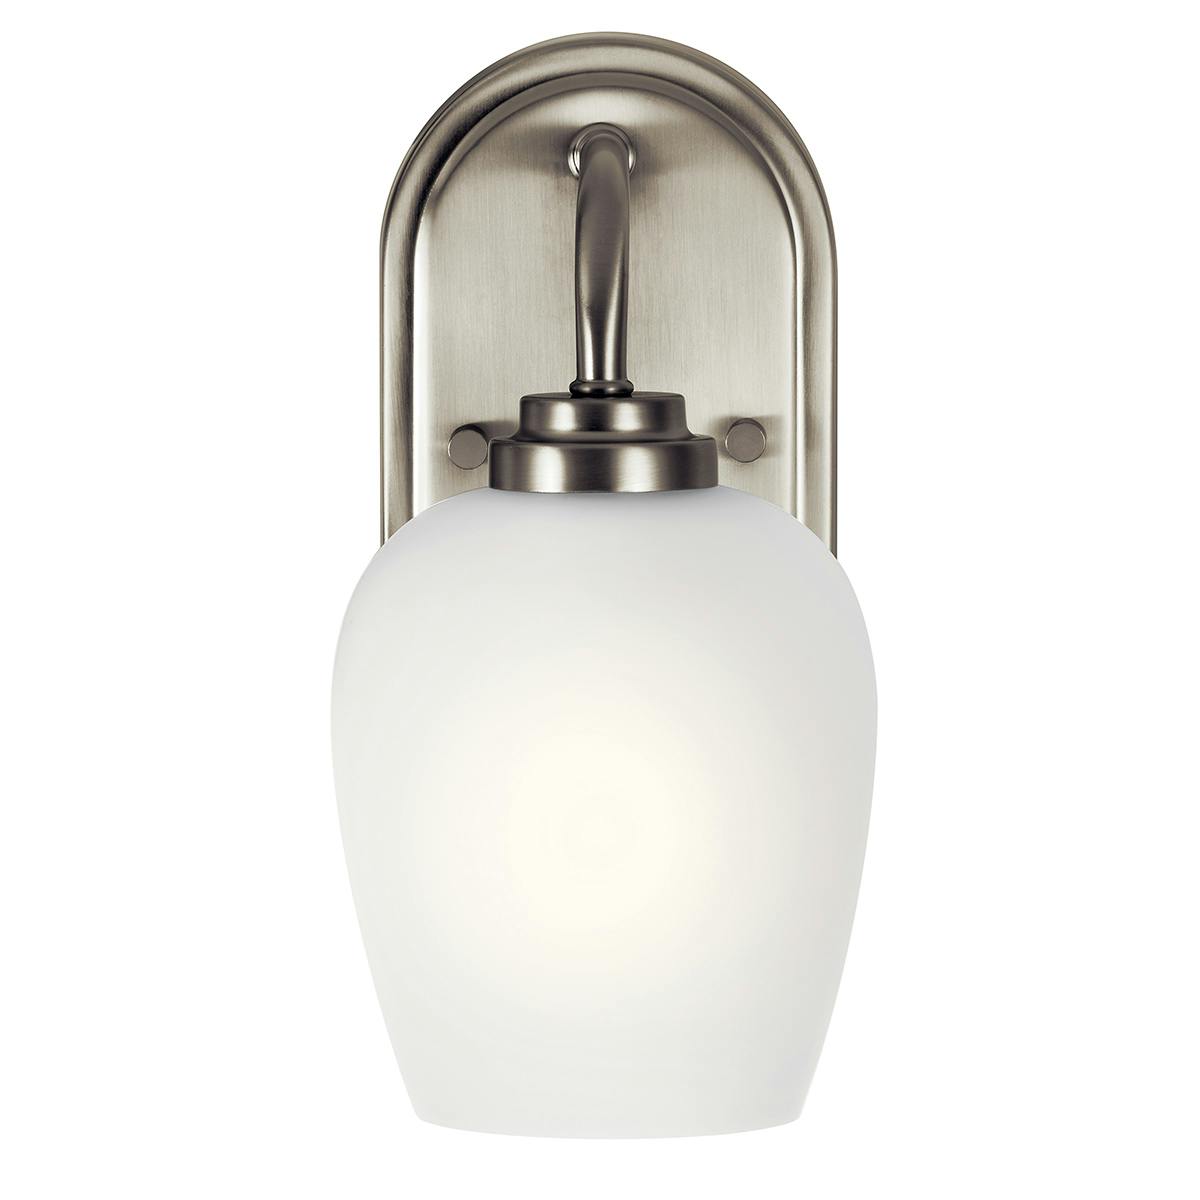 The Valserrano 10" Sconce Glass Nickel facing down on a white background